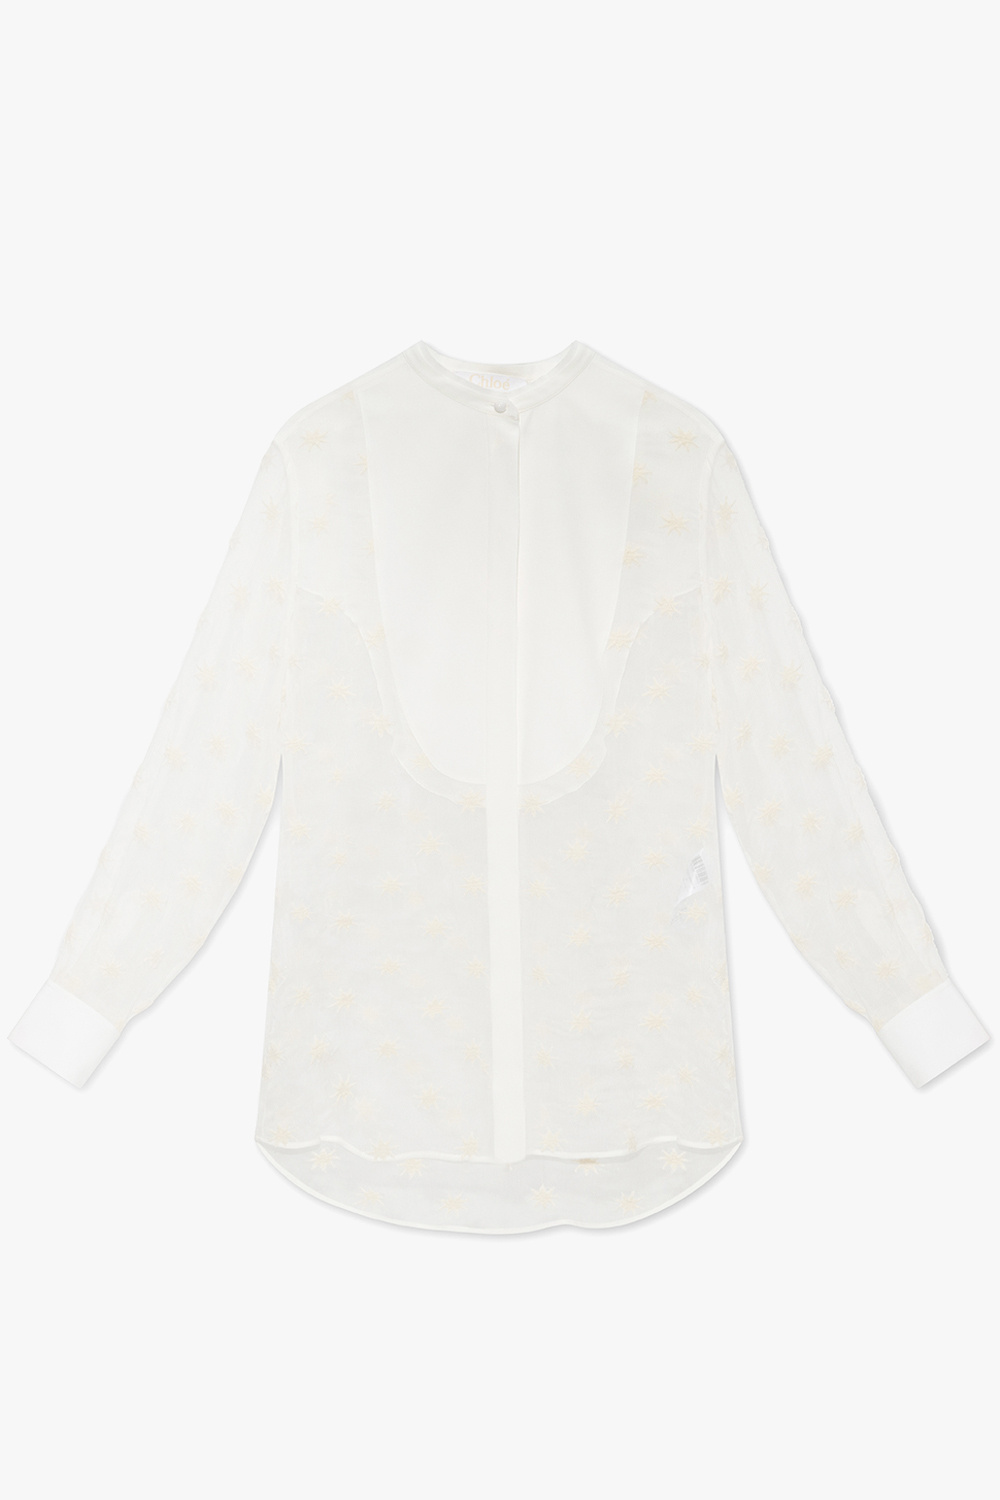 Chloé Sheer top with standing collar